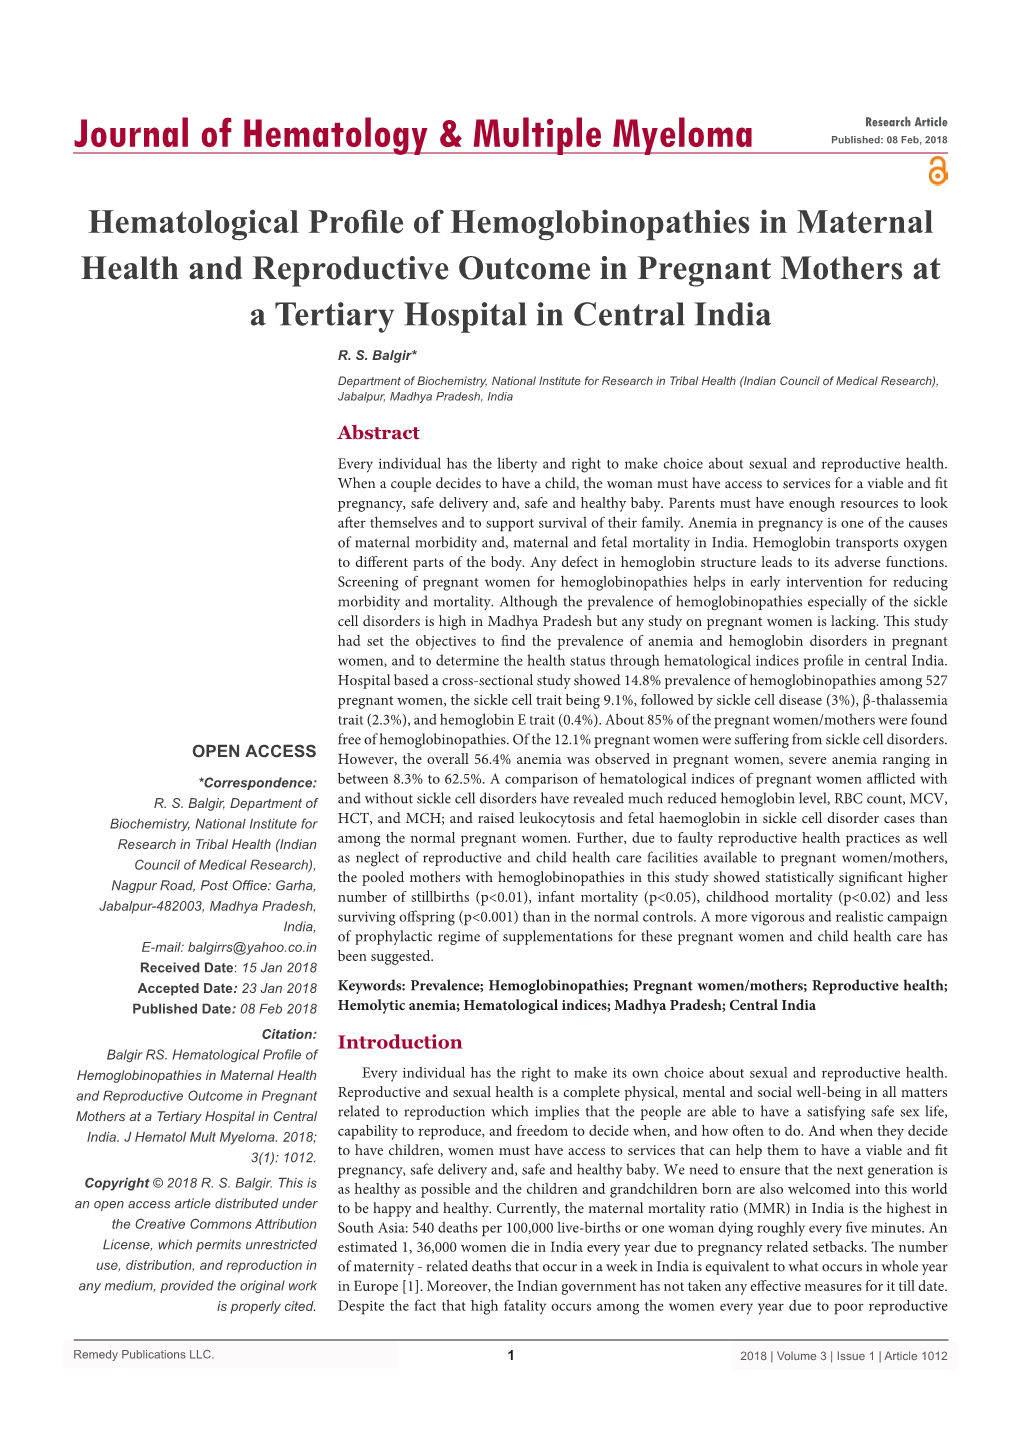 Hematological Profile of Hemoglobinopathies in Maternal Health and Reproductive Outcome in Pregnant Mothers at a Tertiary Hospital in Central India